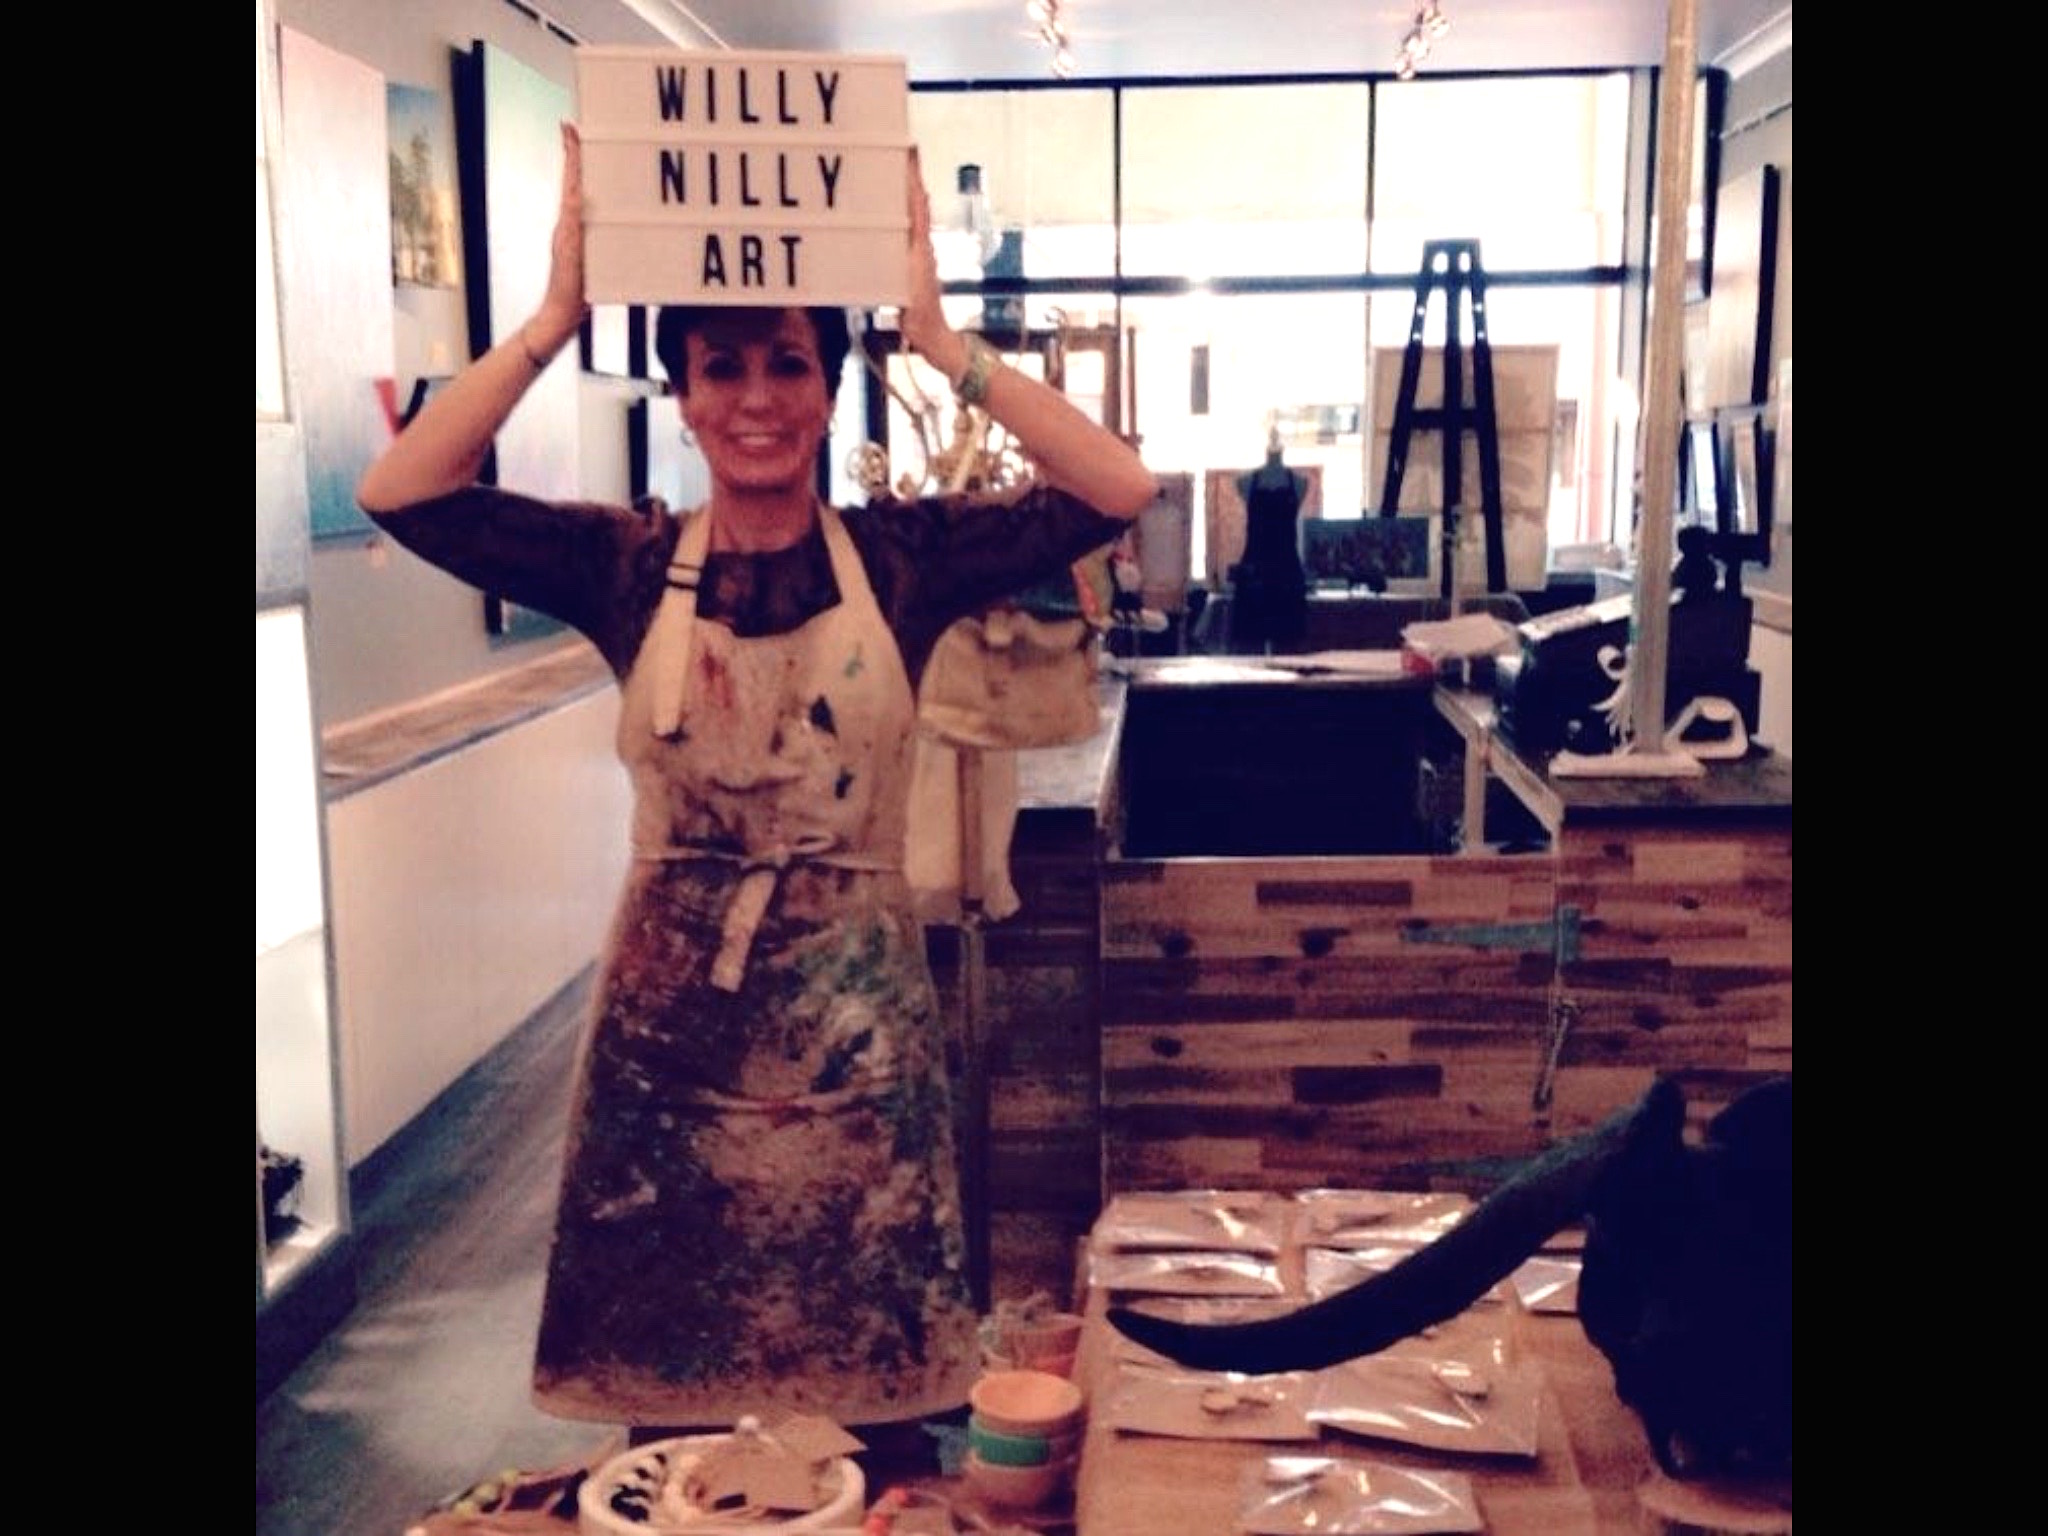 The Artist Amanda Johnson holds up a sign that says Willy Nilly Art. The background is the retail space of her store showing original artworks, jewellery and an apron